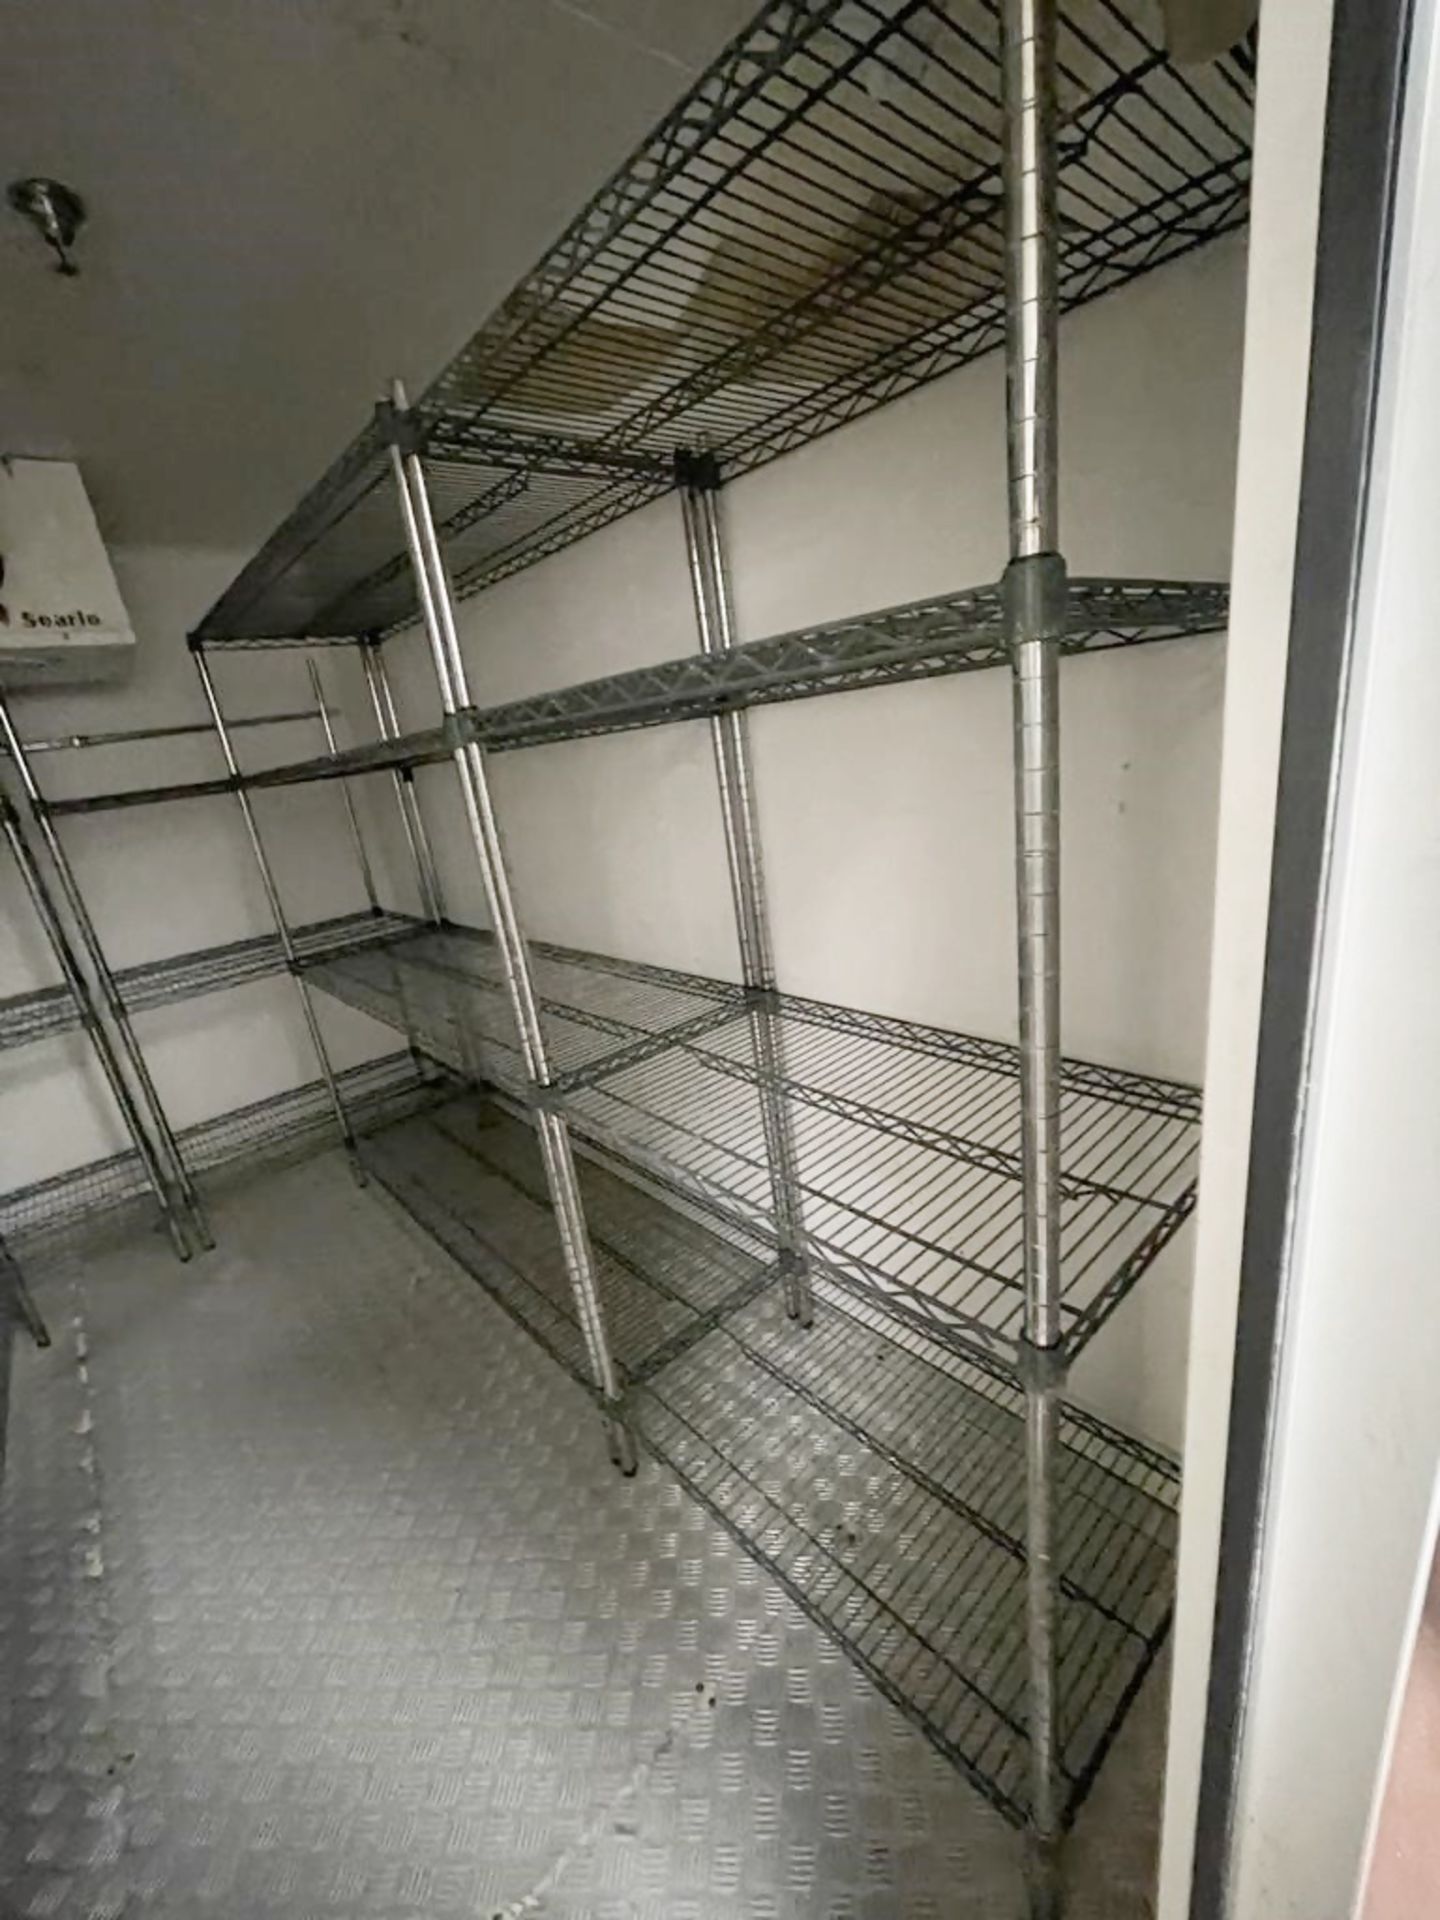 5 x Wire Shelving Racks For Cold Rooms / Commercial Kitchens - CL819 - Location: Altrincham - Image 2 of 2